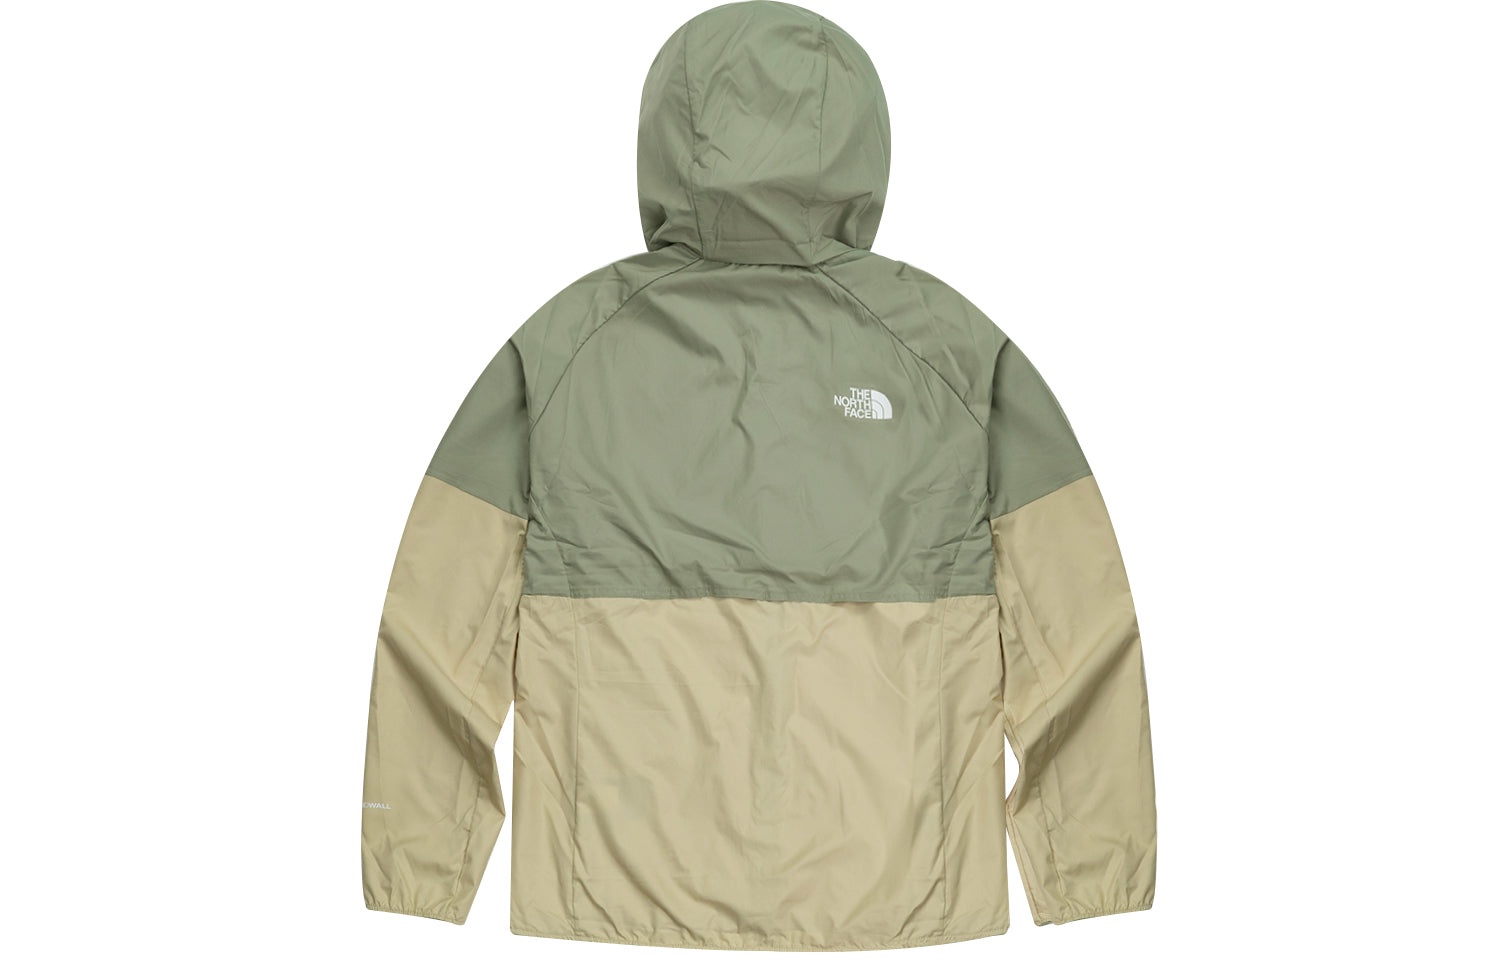 THE NORTH FACE SS22 Sportswear Jacket 'Green' NF0A49B2-48J - 2